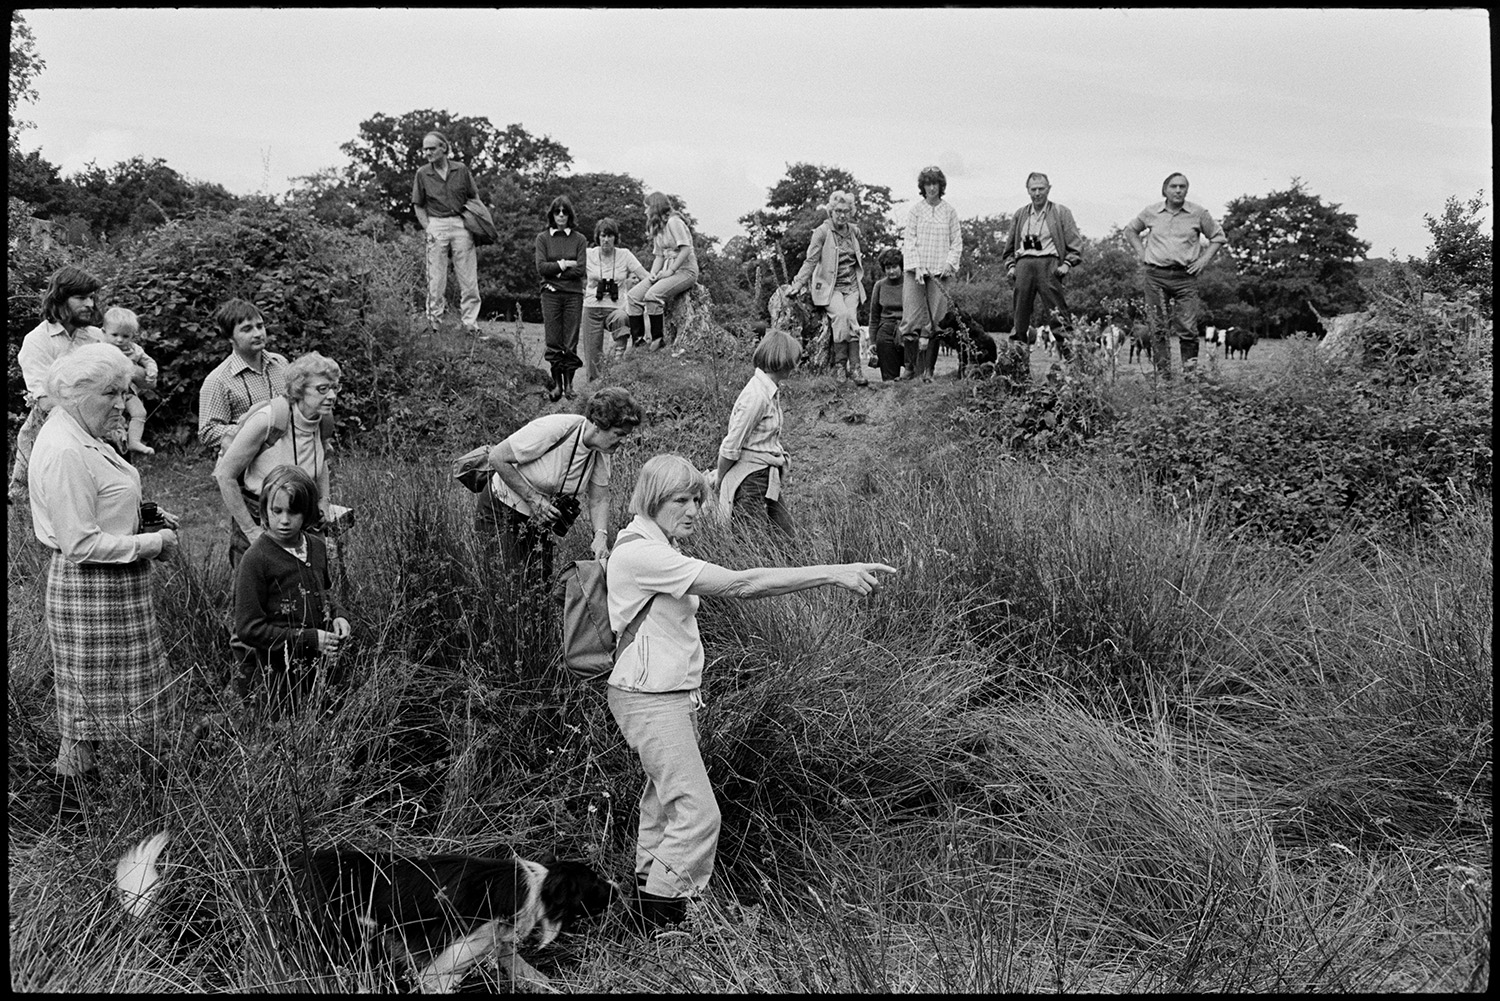 Guided nature walk on nature reserve. 
[Margaret Tulloh taking a group of men and women on a guided nature walk at Halsdon Nature Reserve, Dolton. She is pointing to something in the undergrowth. A dog is with her.]